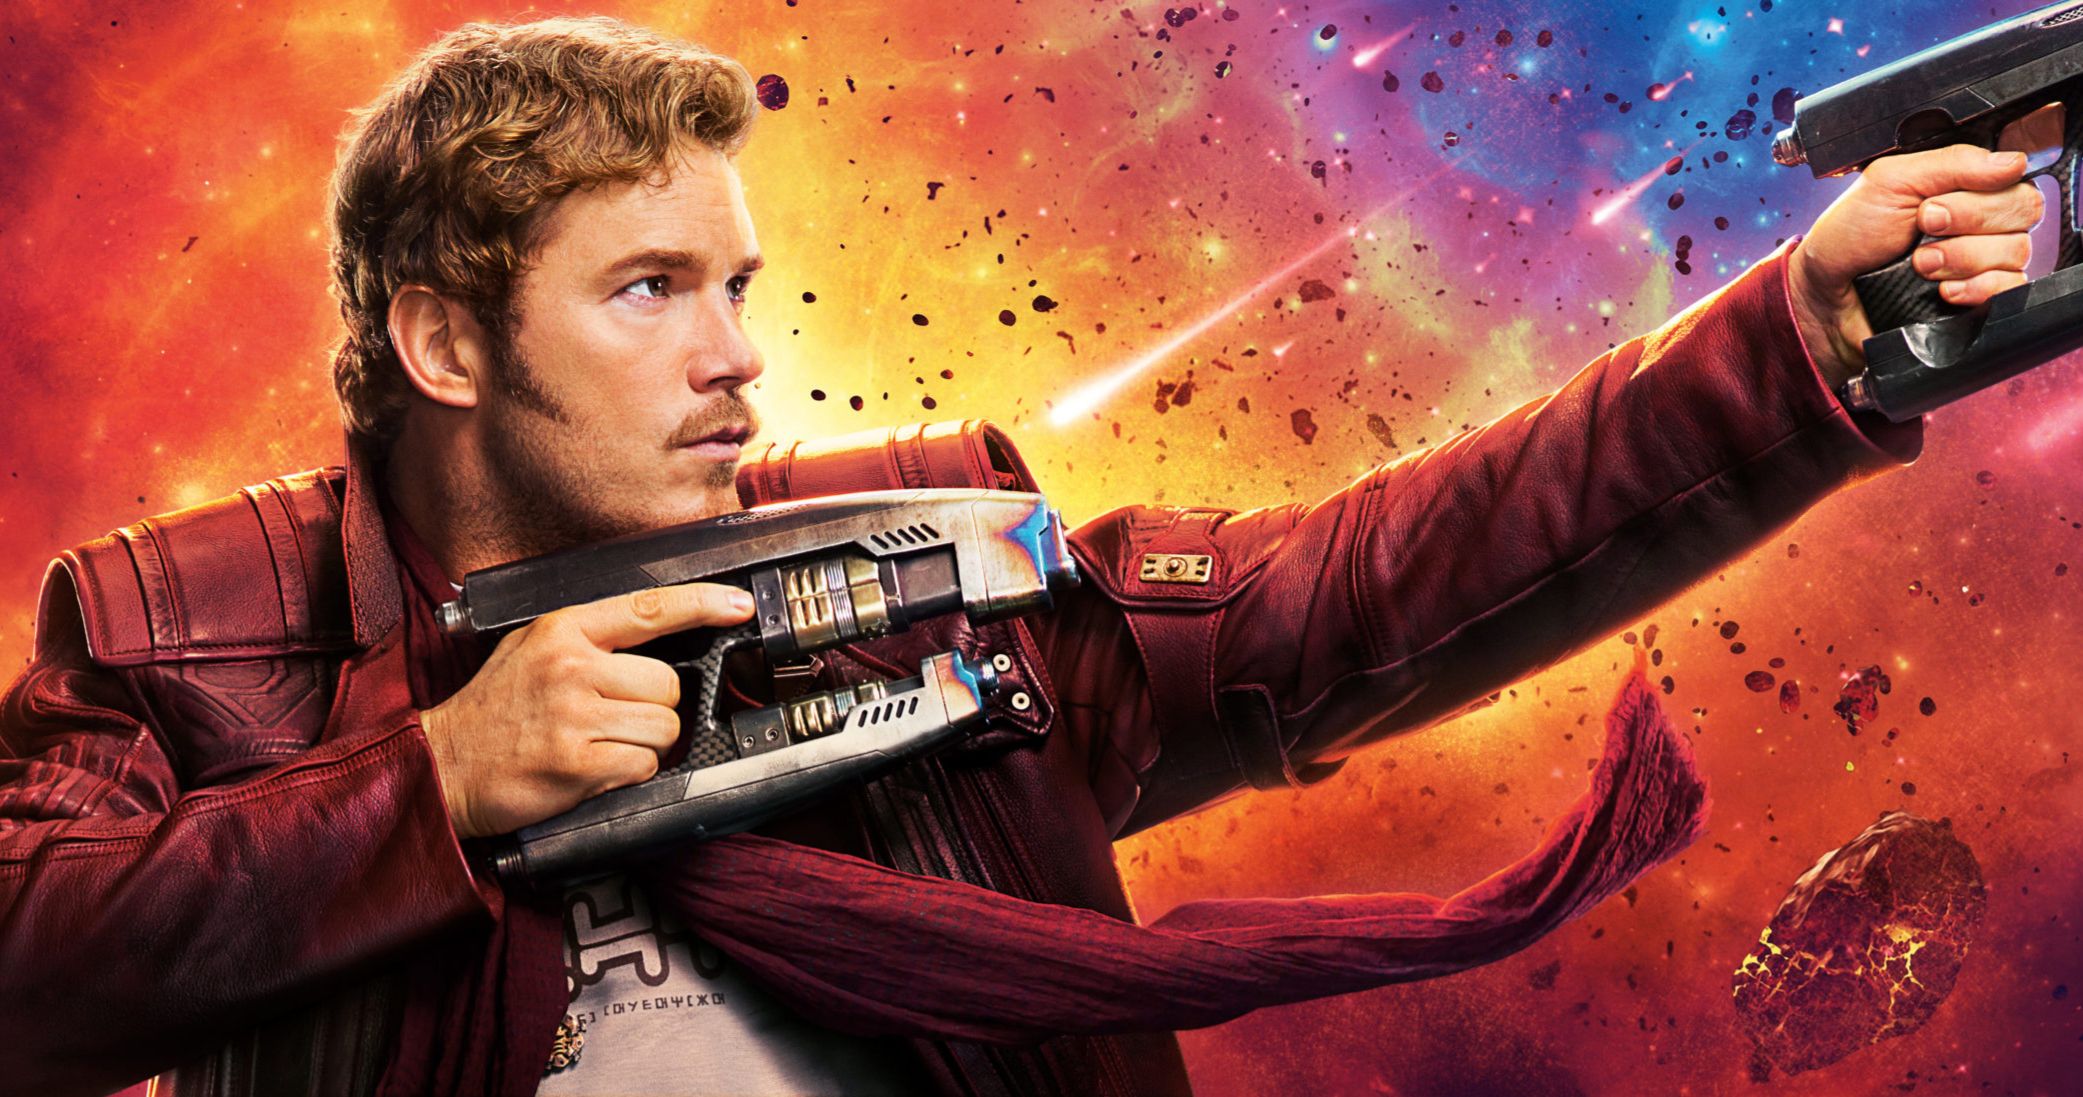 Guardians of the Galaxy Got Chris Pratt in the Bad Habit of Making Pew-Pew Noises While Filming